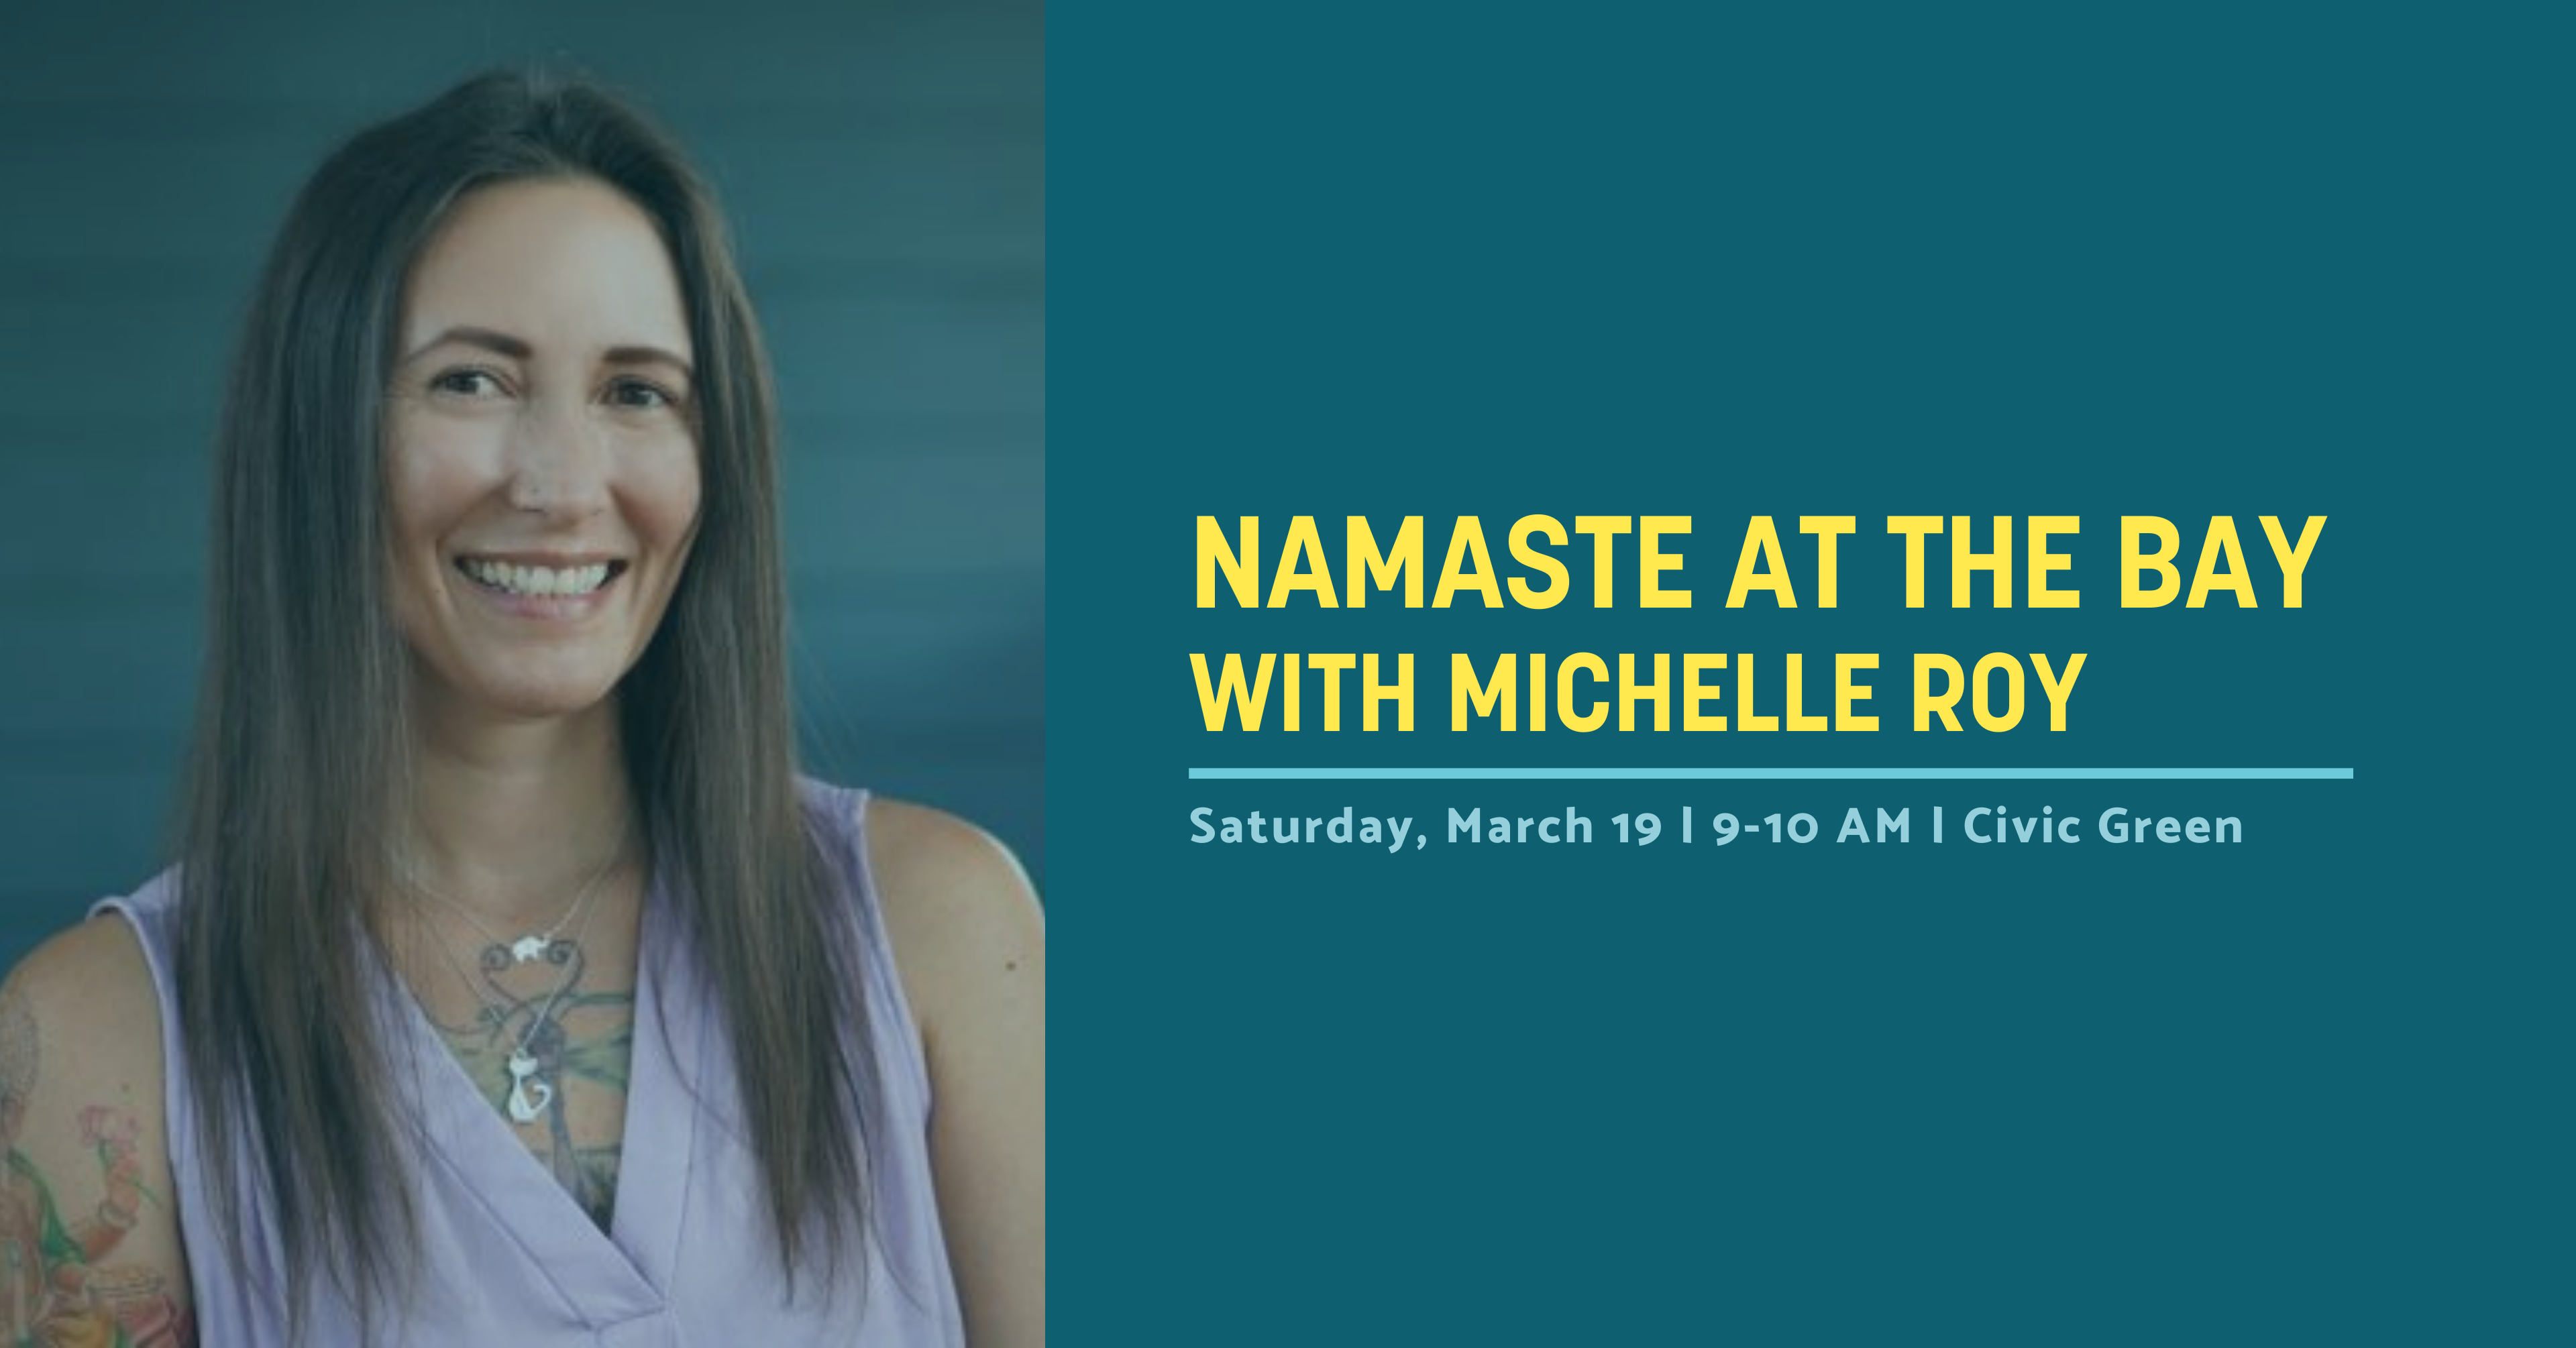 Program info for Namaste at The Bay with Michelle Roy on March 19, 2022 at The Bay Civic Green from 9-10AM